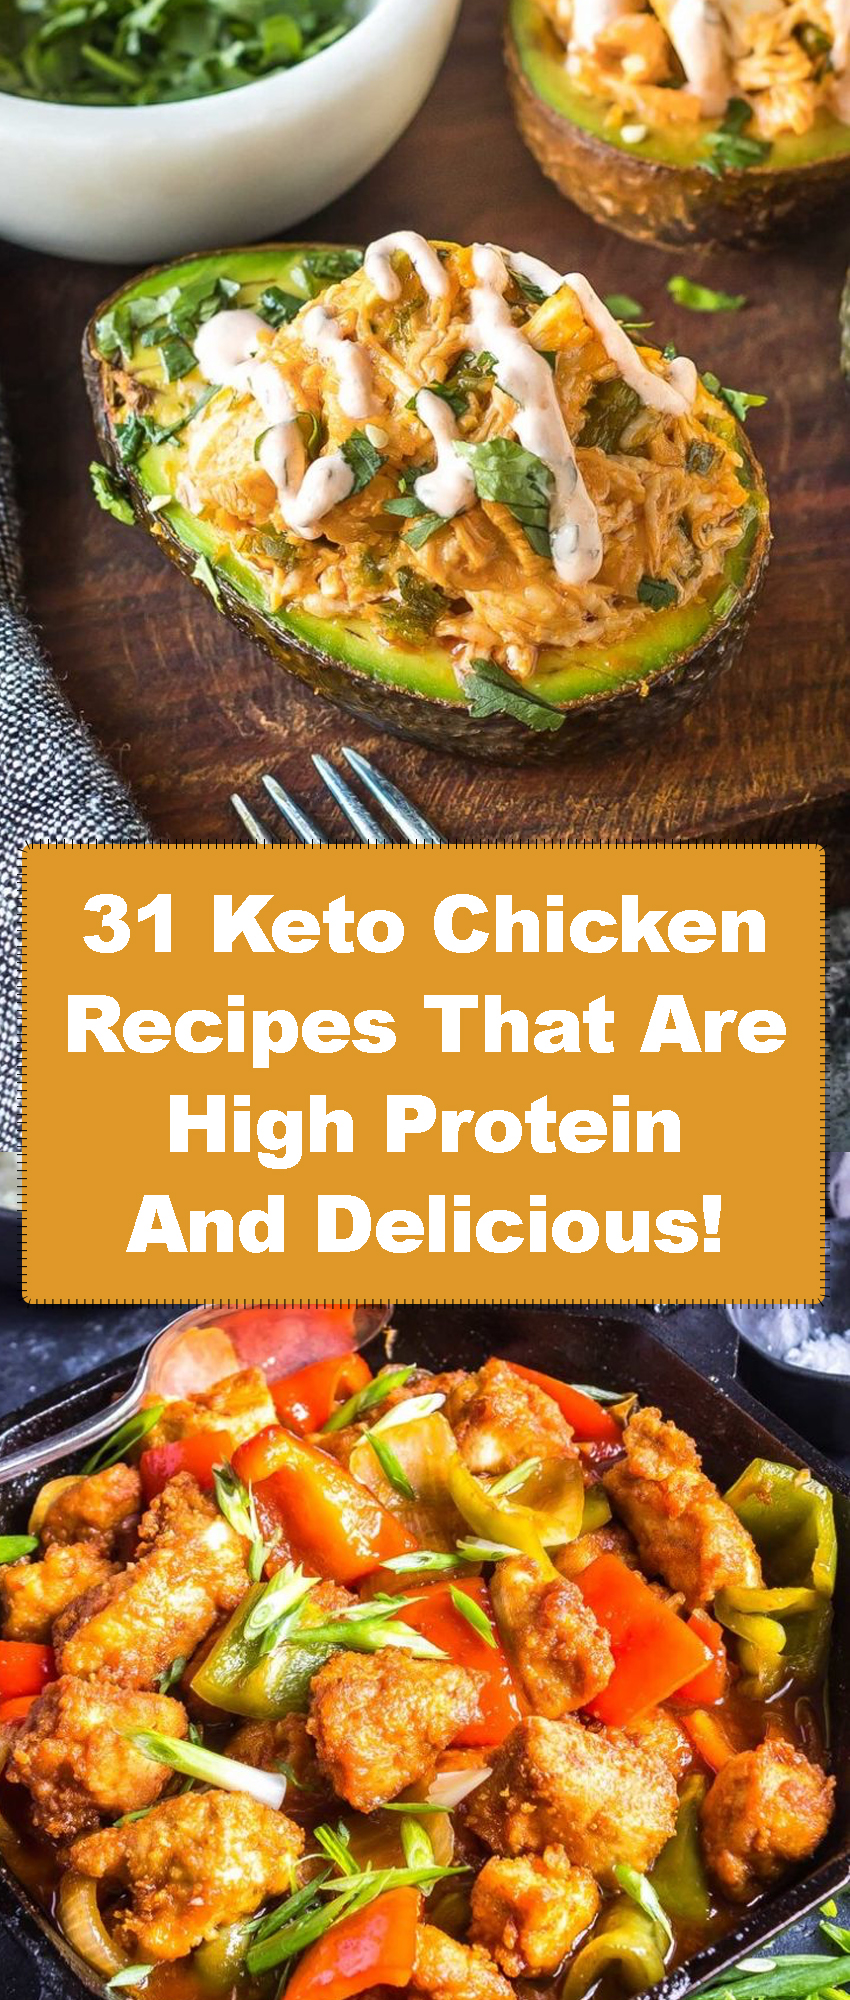 31 Keto Chicken Recipes That Are High Protein And Delicious ...